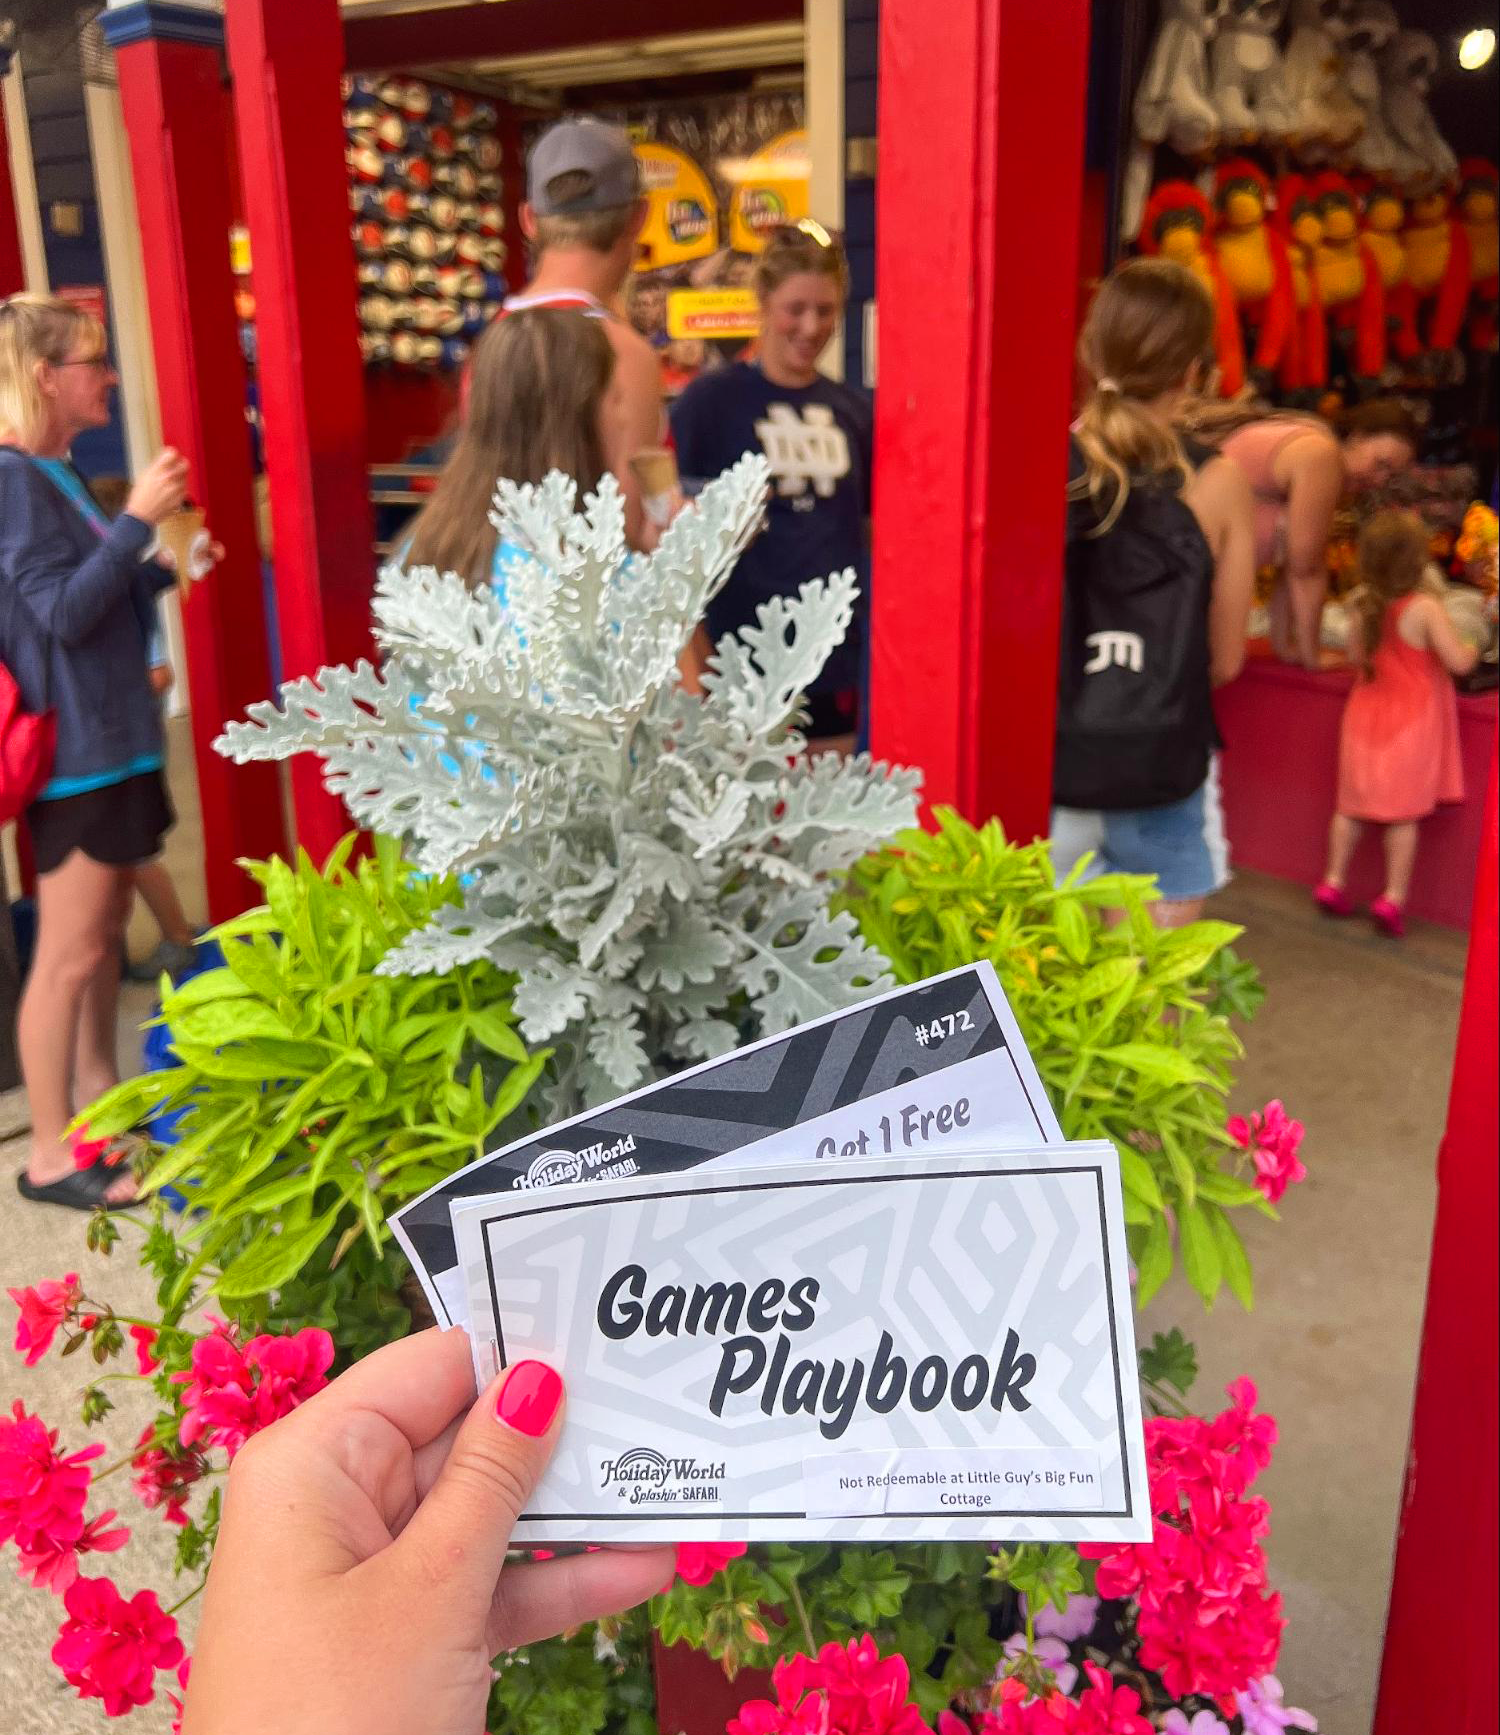 A 2023 Games Playbook is held up in front of games in the 4th of July section of the park.